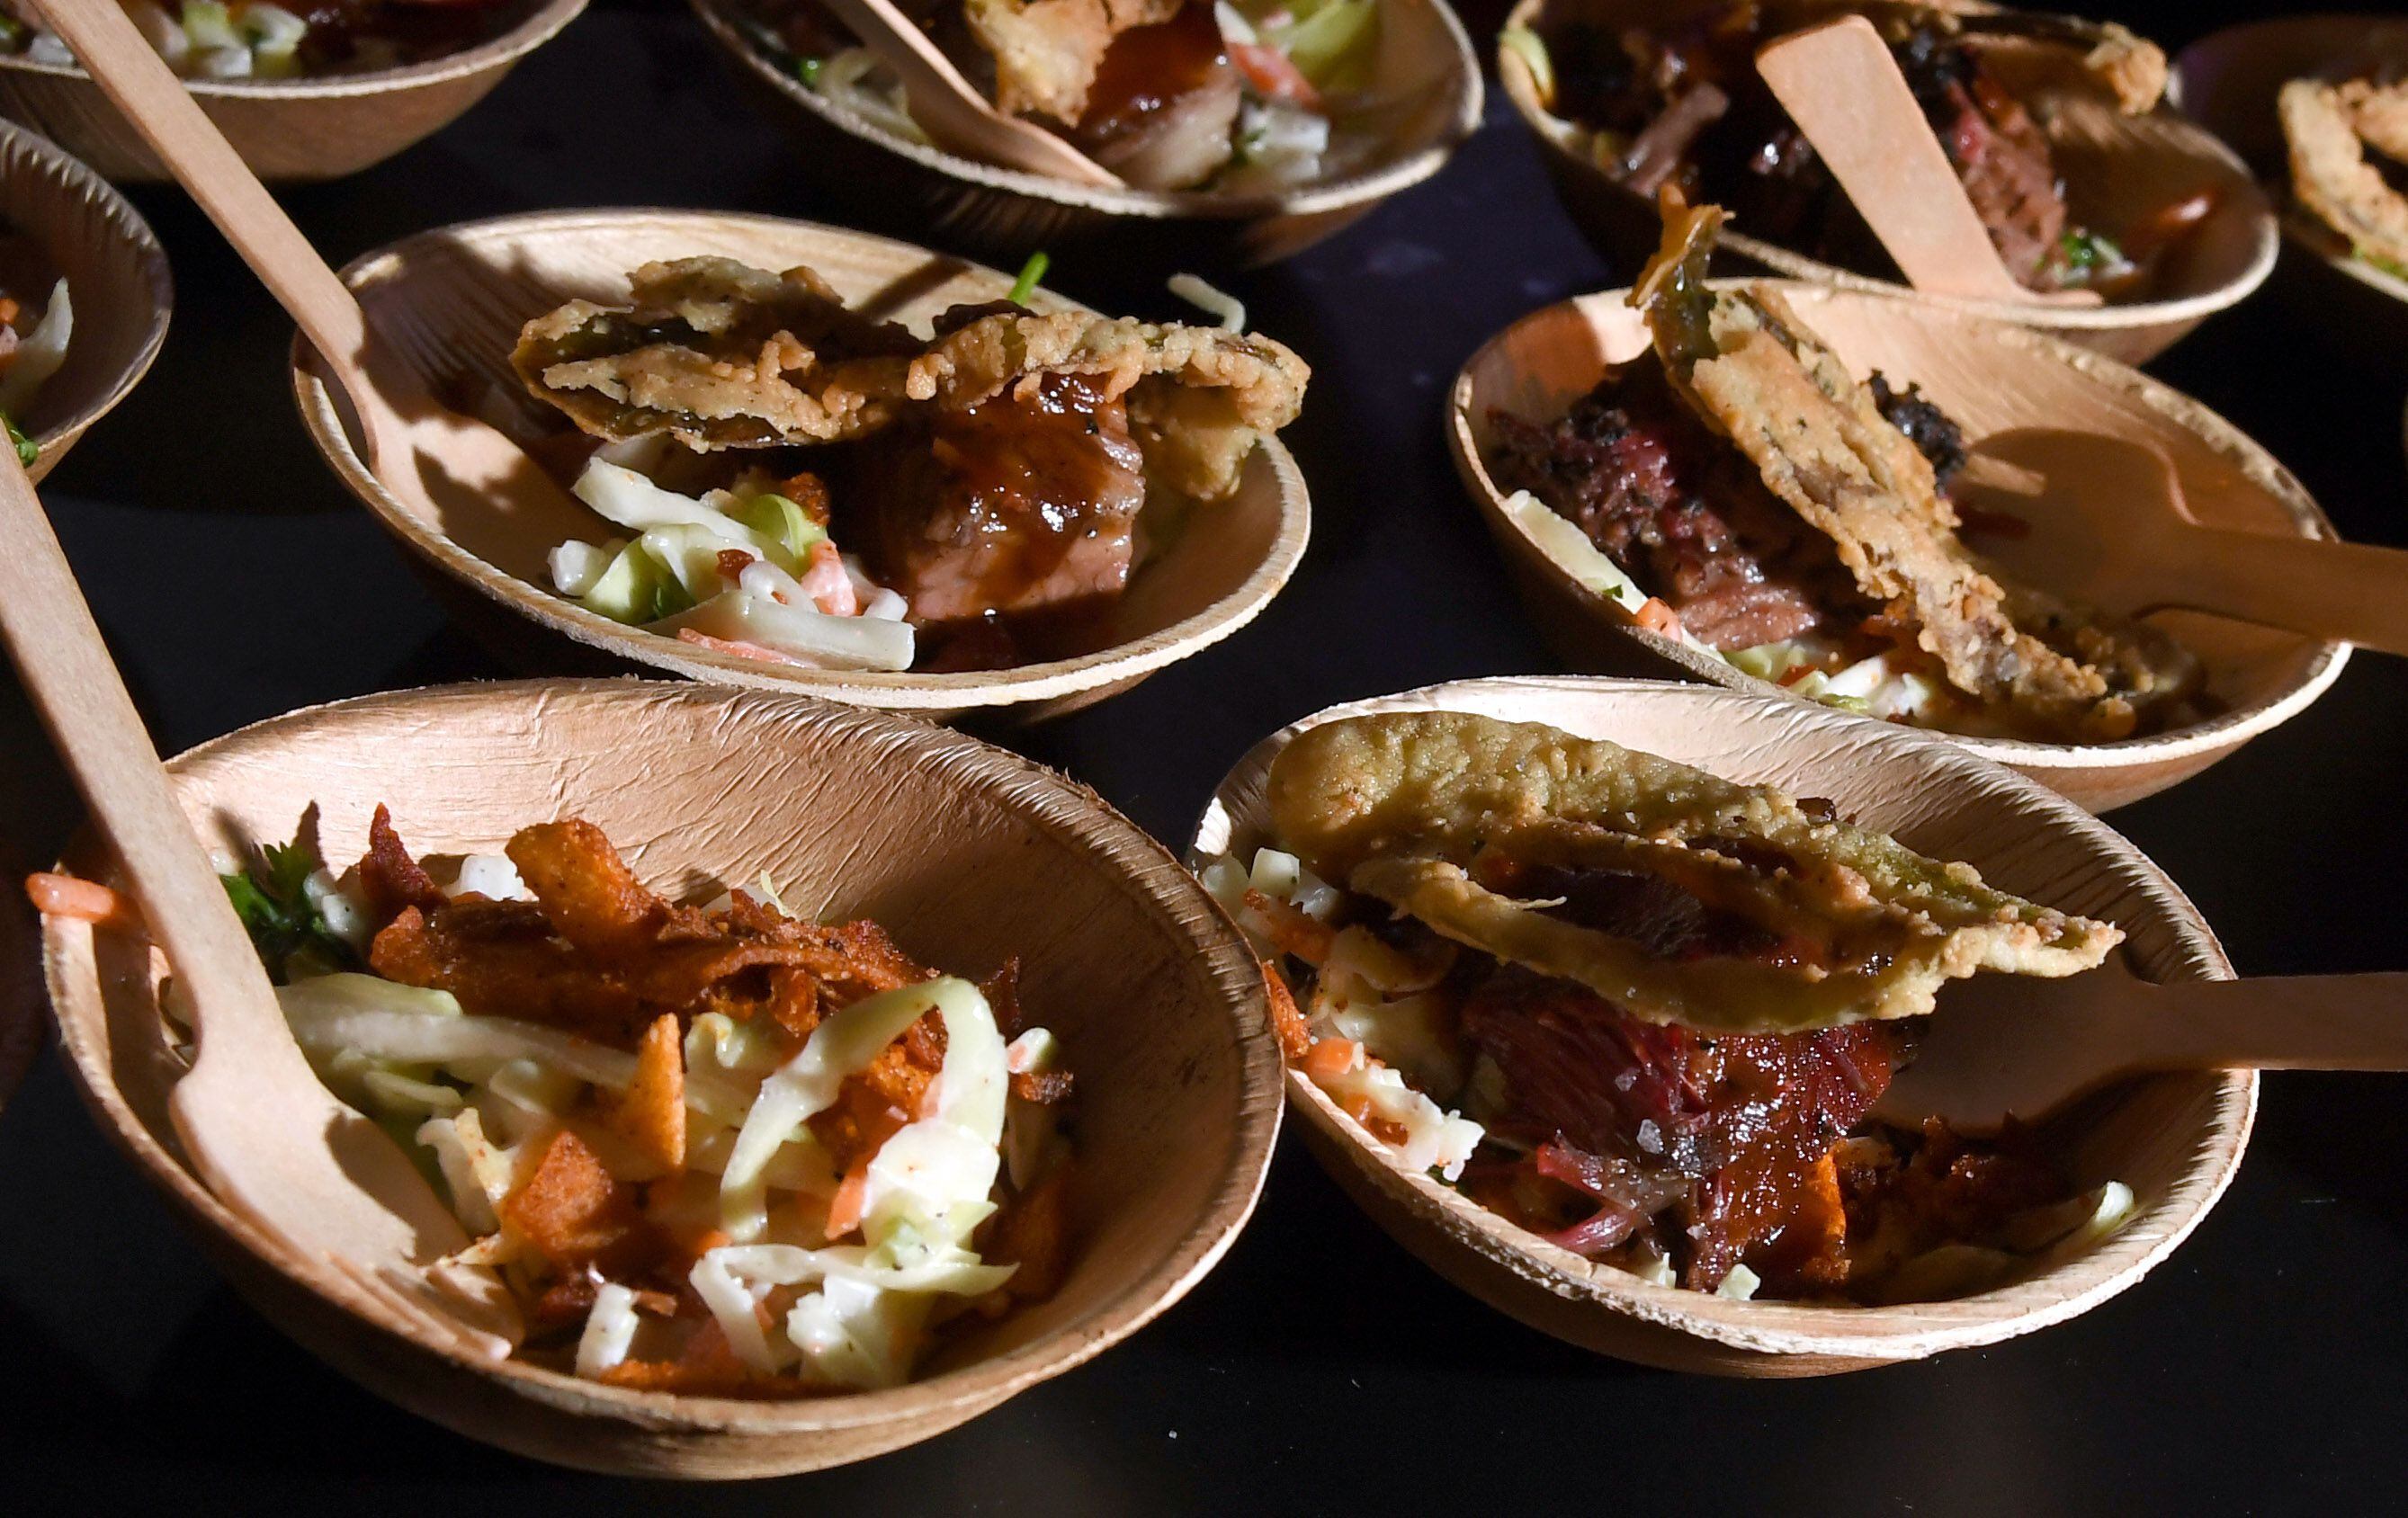 LAS VEGAS, NEVADA - MAY 10:  Mini burnt end burrito bowls are served at the BBQ Mexicana booth at the 13th annual Vegas Uncork'd by Bon Appetit Grand Tasting event presented by the Las Vegas Convention and Visitors Authority at Caesars Palace on May 10, 2019 in Las Vegas, Nevada.  (Photo by Ethan Miller/Getty Images for Vegas Uncork’d by Bon Appétit)